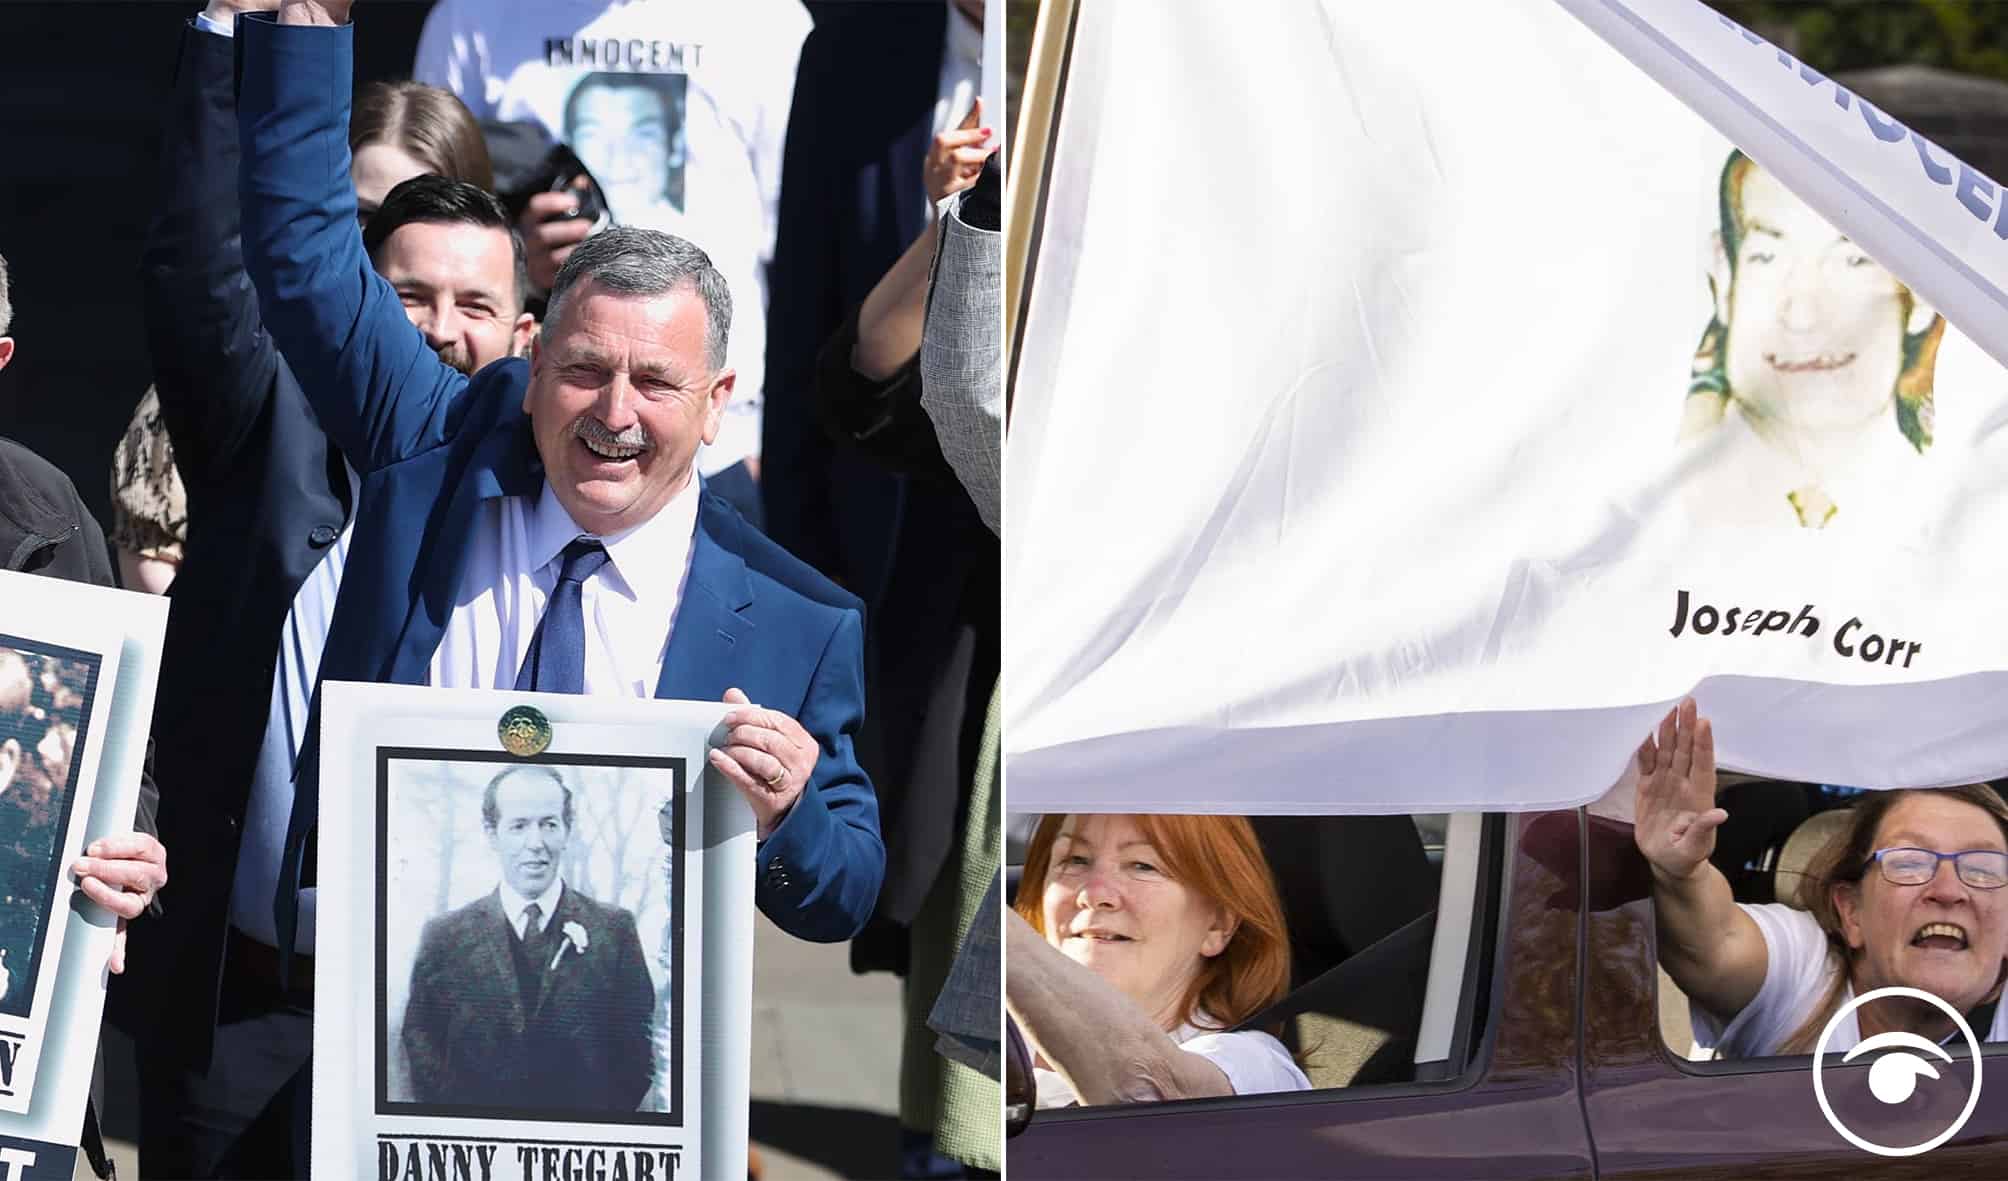 Ballymurphy victims: Calls for UK apology as cars parade to applause after coroner’s ruling